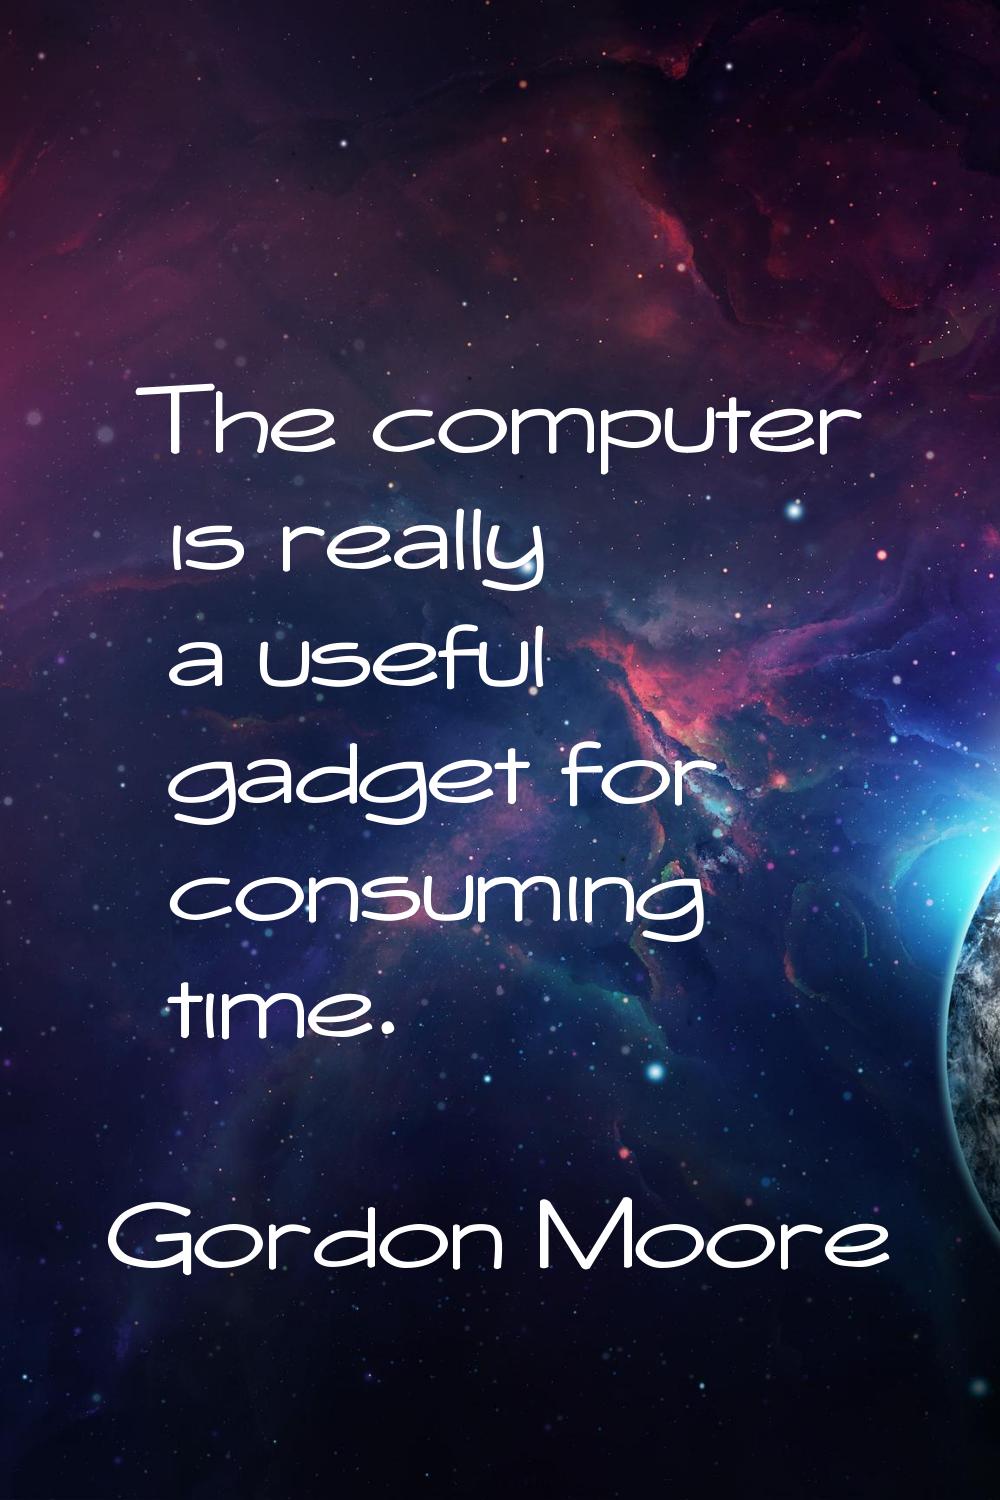 The computer is really a useful gadget for consuming time.